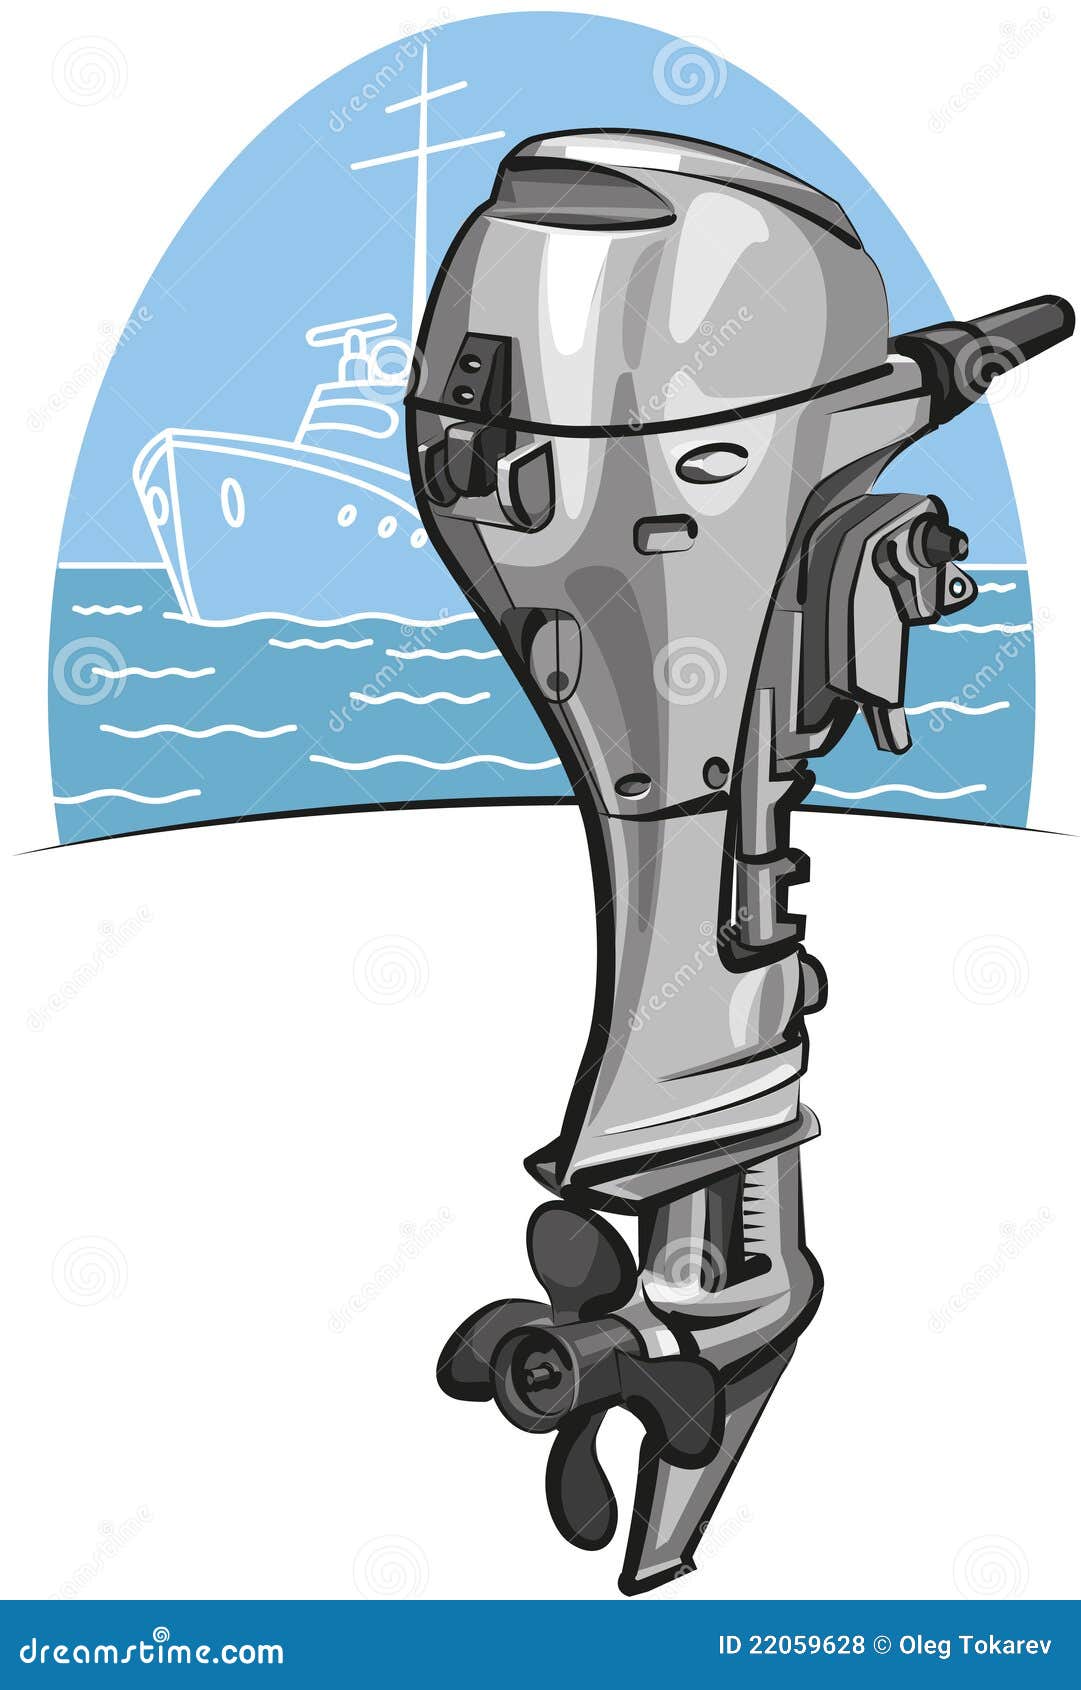 Outboard Boat Motor Royalty Free Stock Photos - Image: 22059628